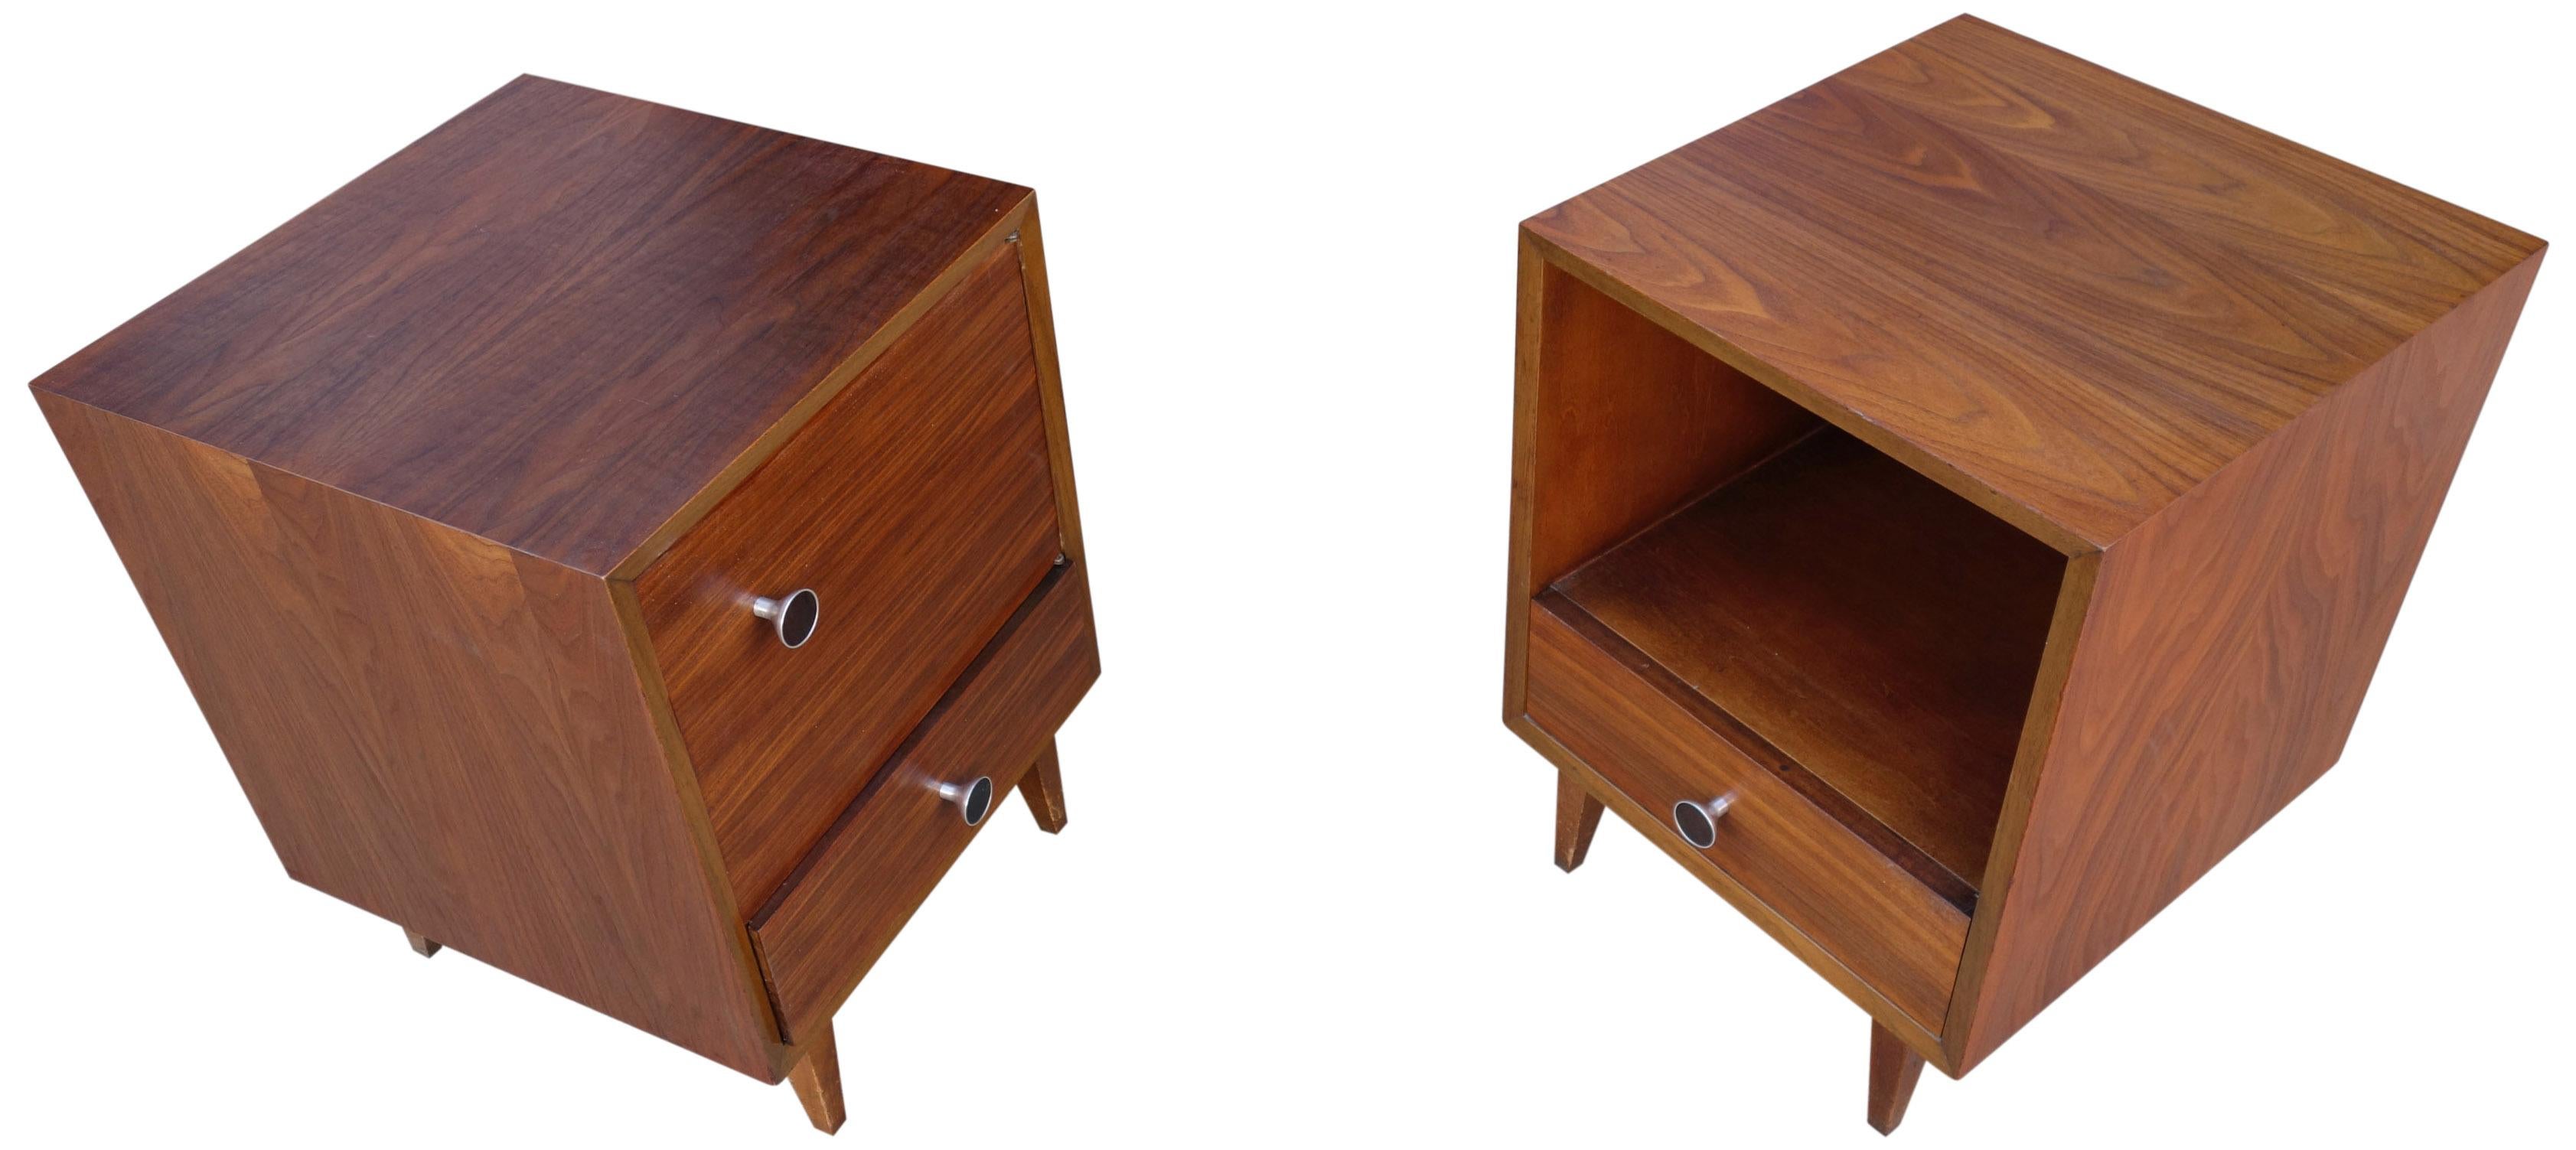 Midcentury nightstands, bedside tables, or end tables by George Nelson for Herman Miller. Highly figured walnut almost has a rosewood appearance. Featuring the seldom seen pulls with ebony inlay. 

-Photos taken with natural light on a sunny day.